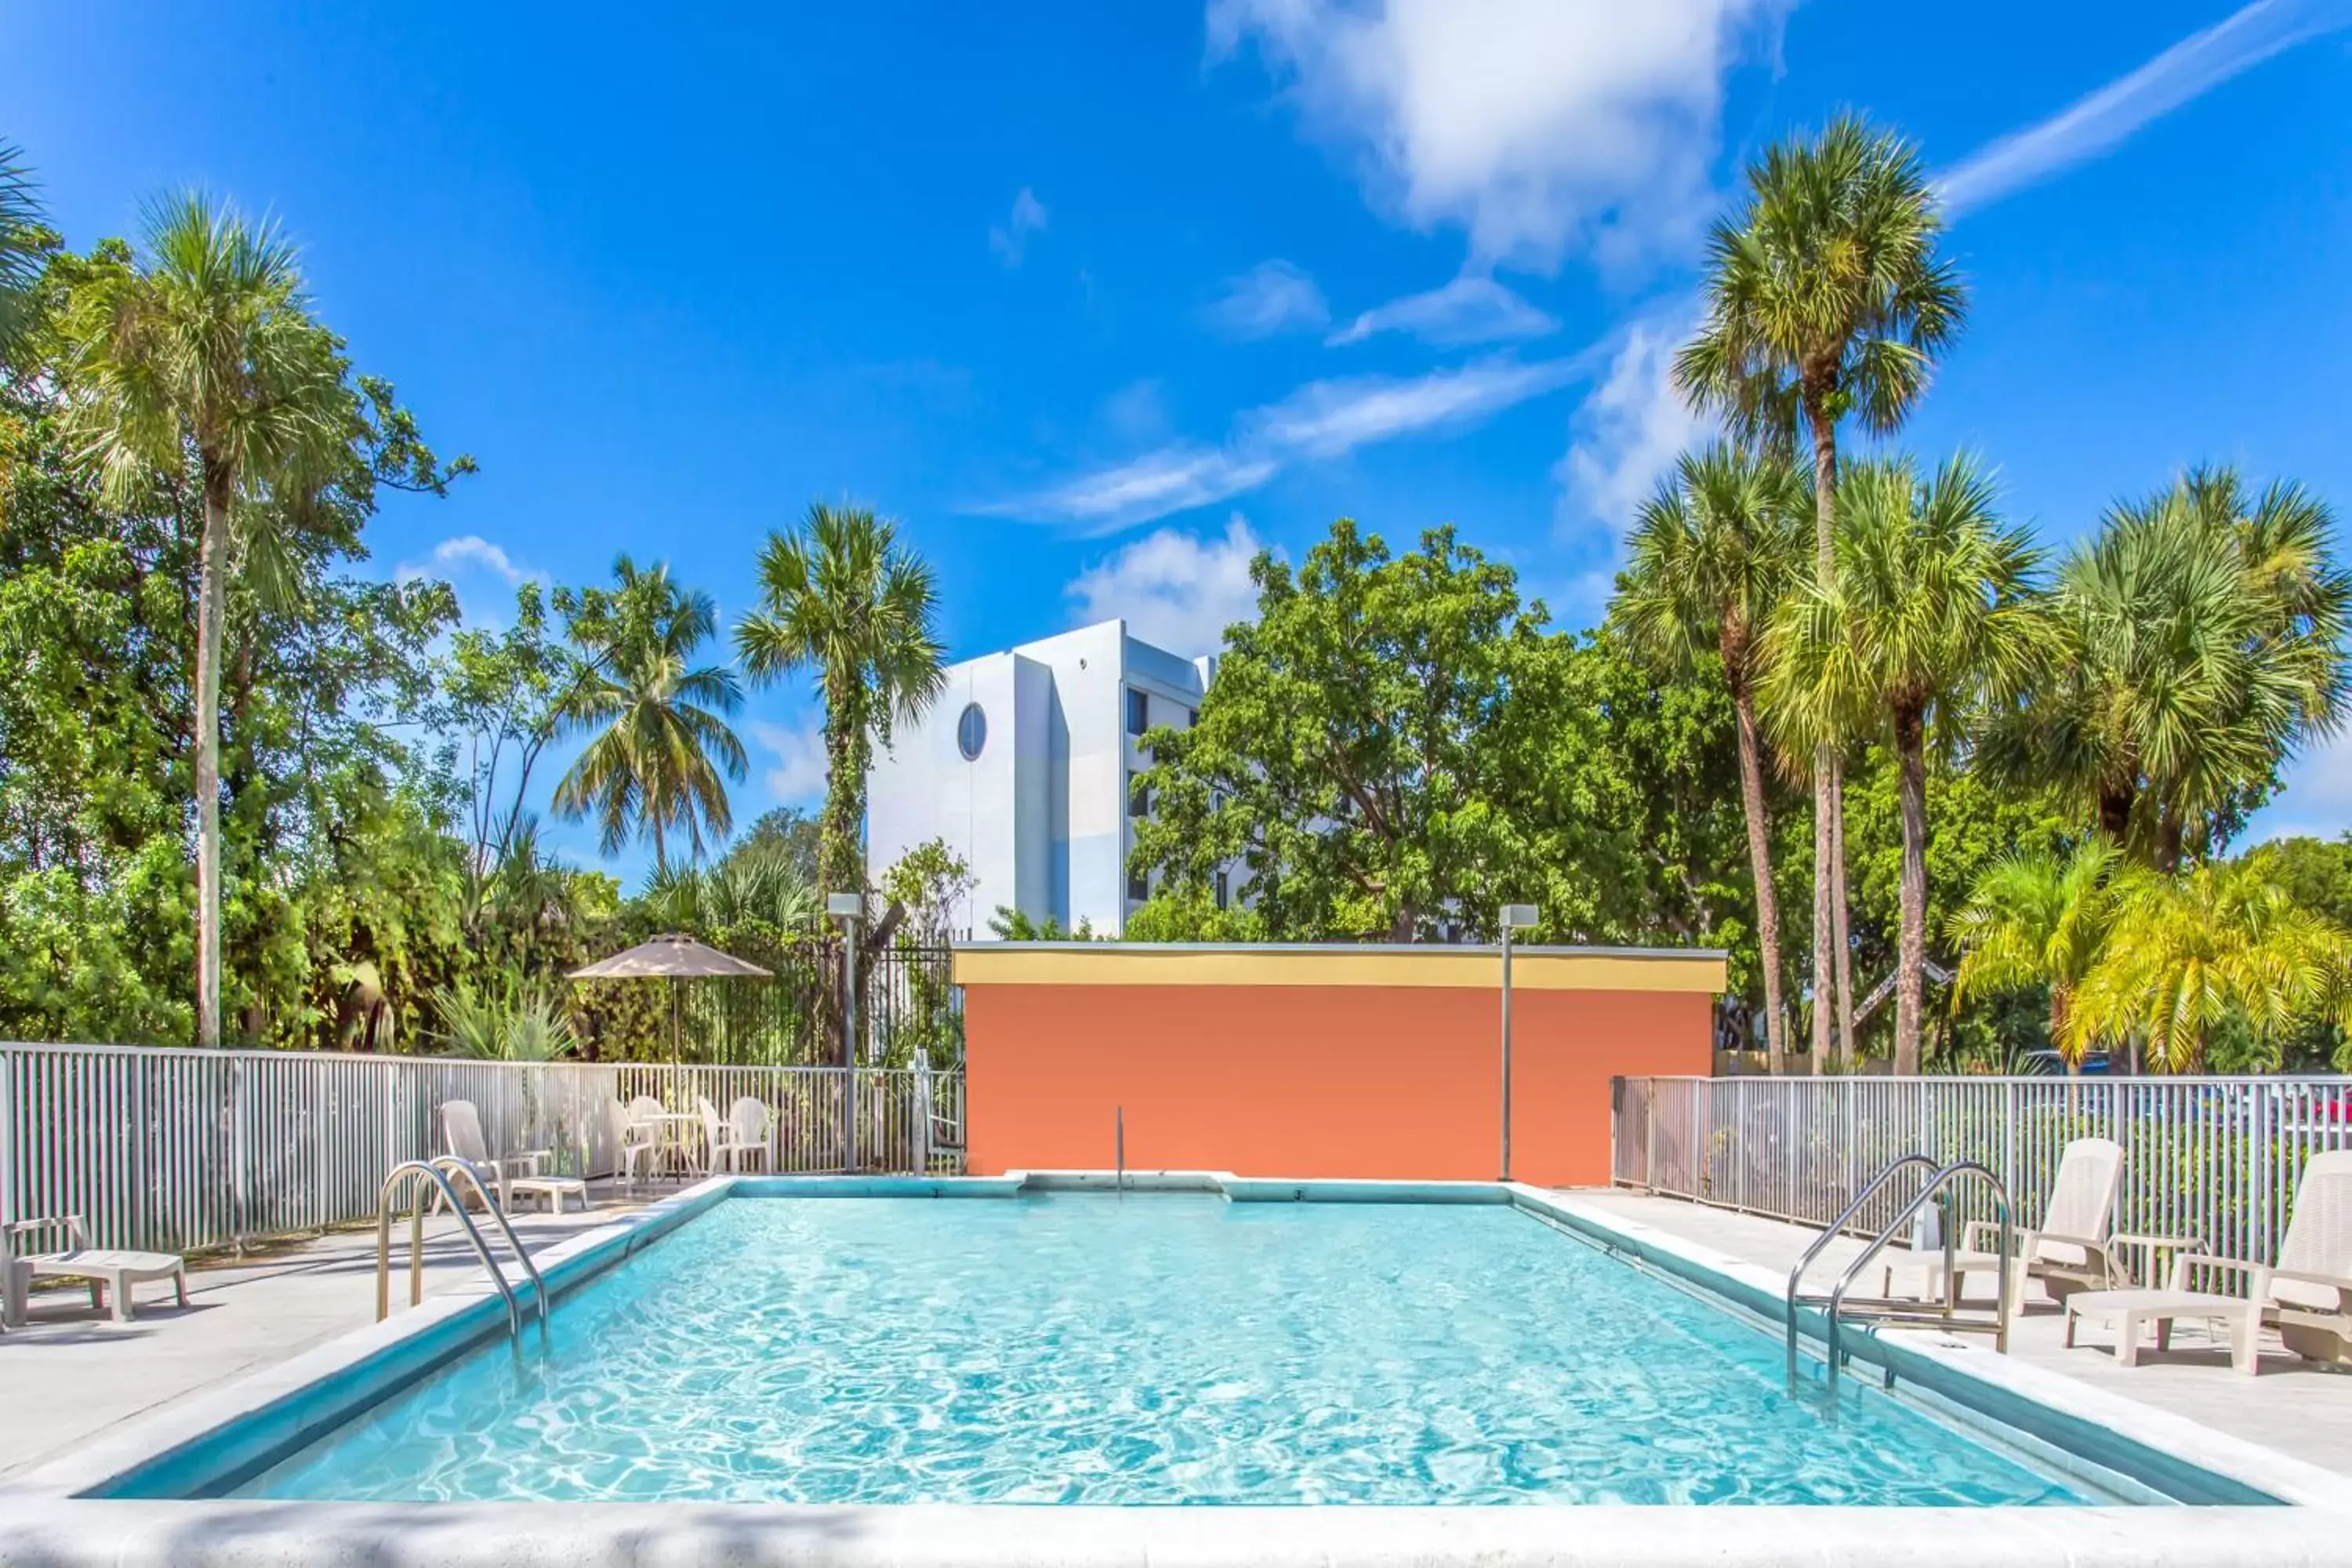 Day, Swimming Pool in Days Inn by Wyndham Fort Lauderdale Airport Cruise Port